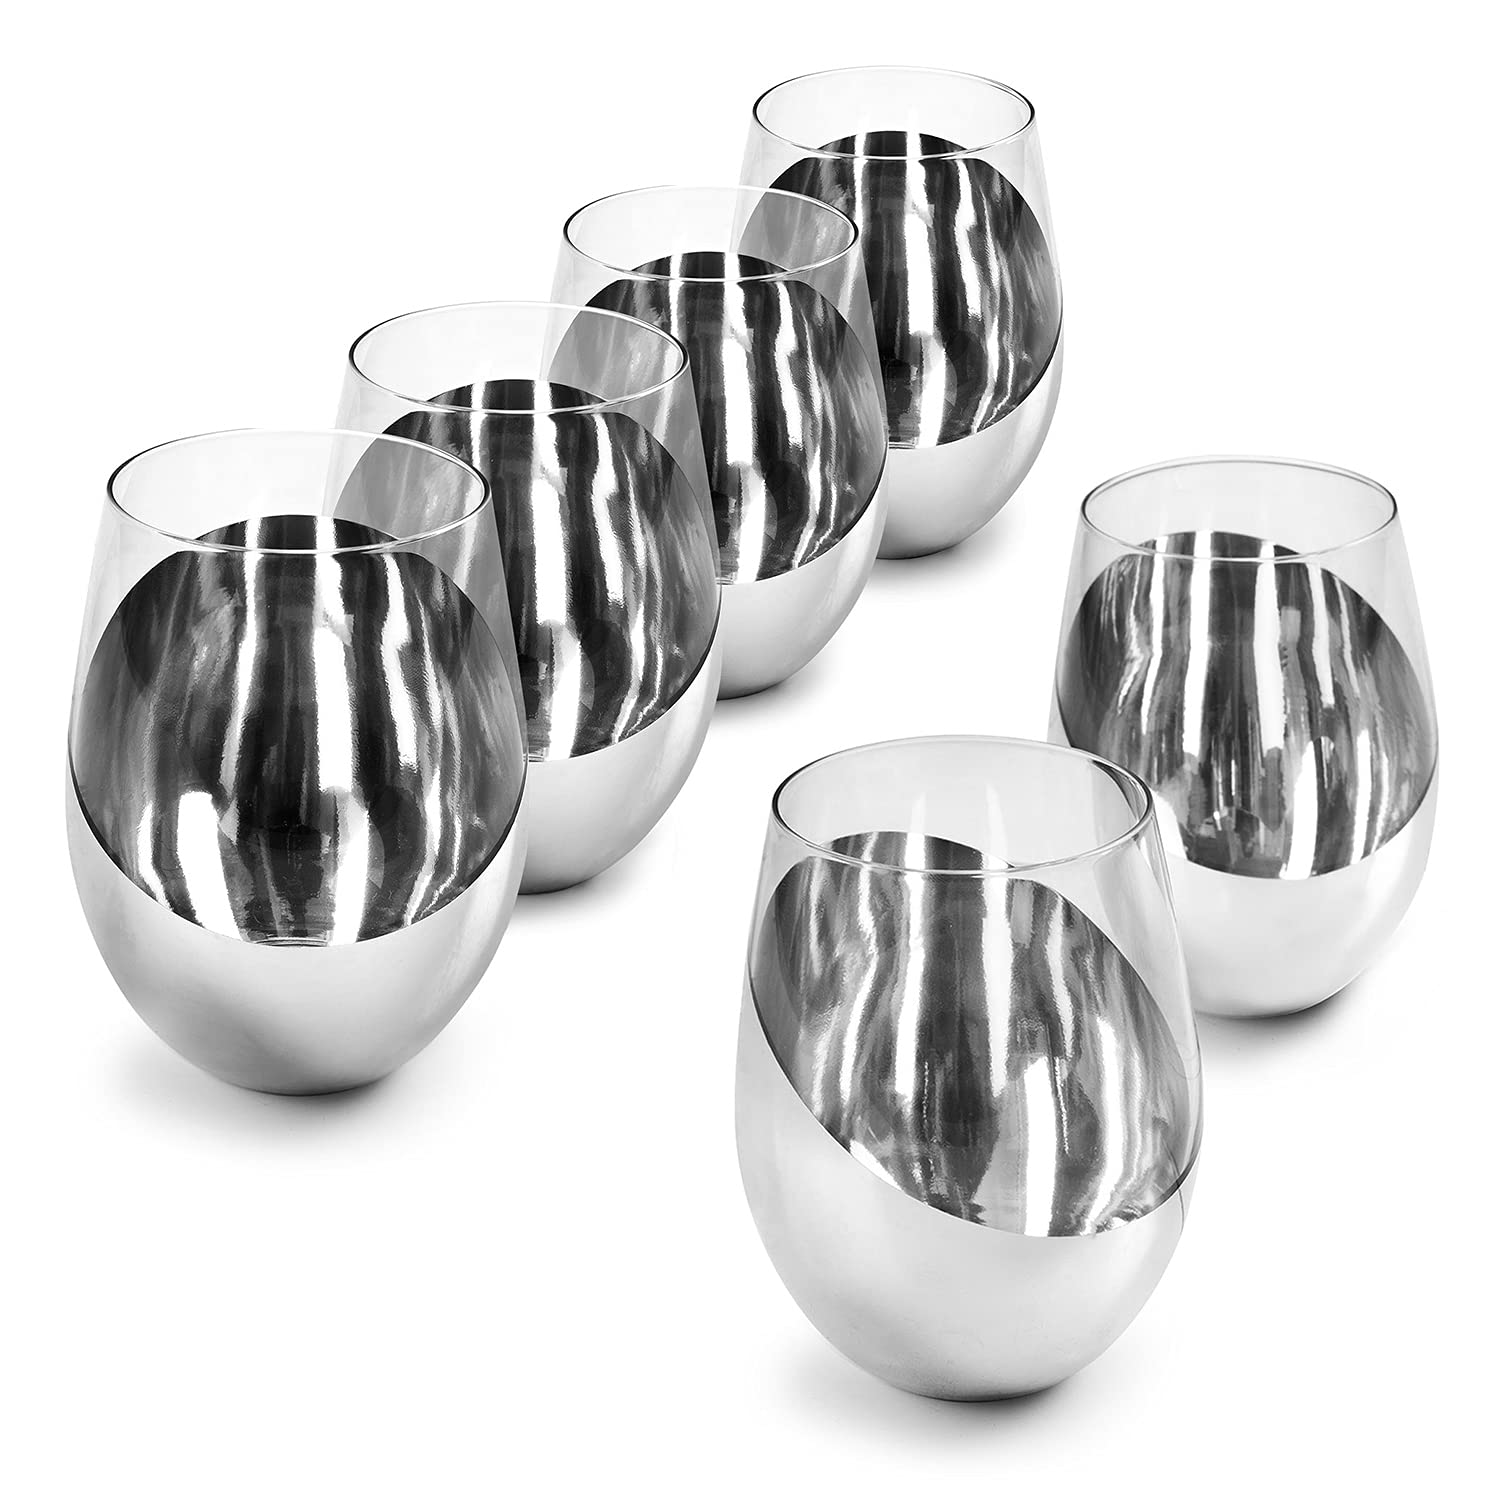 MyGift Modern Stemless Wine Glass Set of 6, White or Red Wine Glasses with Silver Metallic Bottom Angled Design